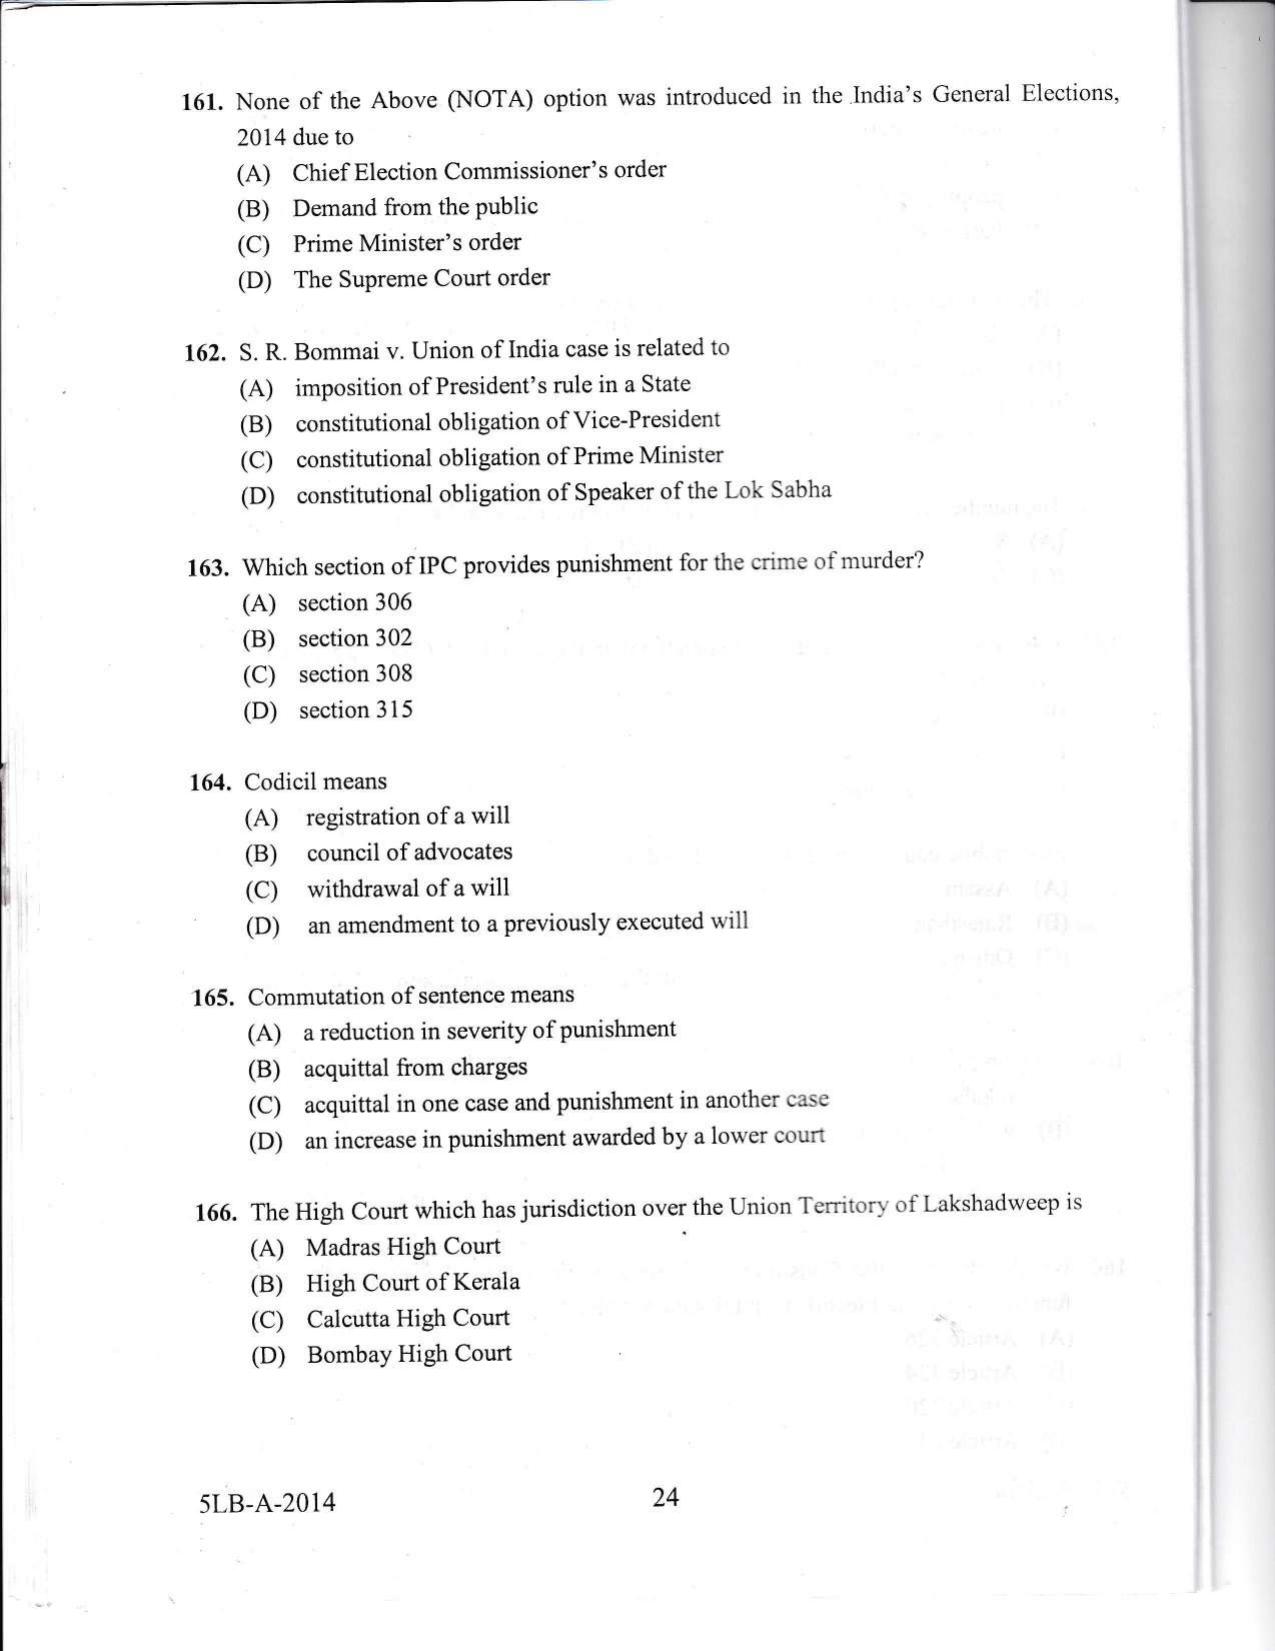 KLEE 5 Year LLB Exam 2014 Question Paper - Page 24